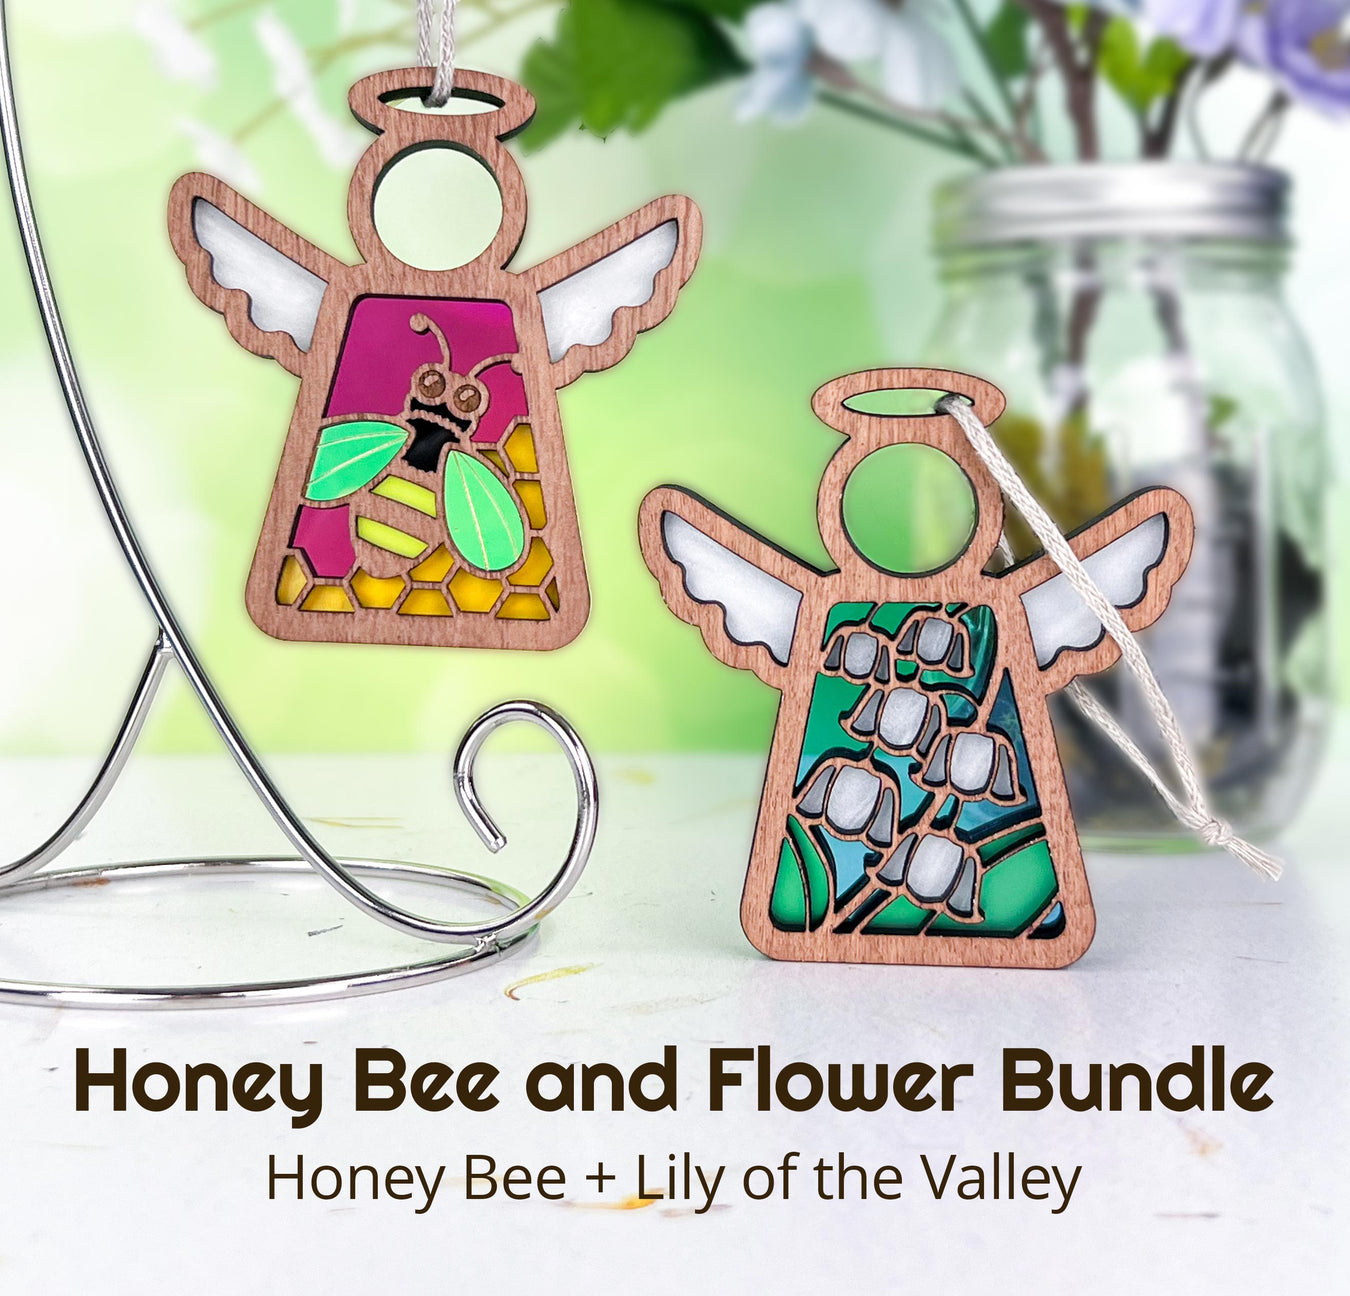 Honey Bee and Flower Bundle - Honey Bee and Lily of the Valley Mother’s Angels are included.